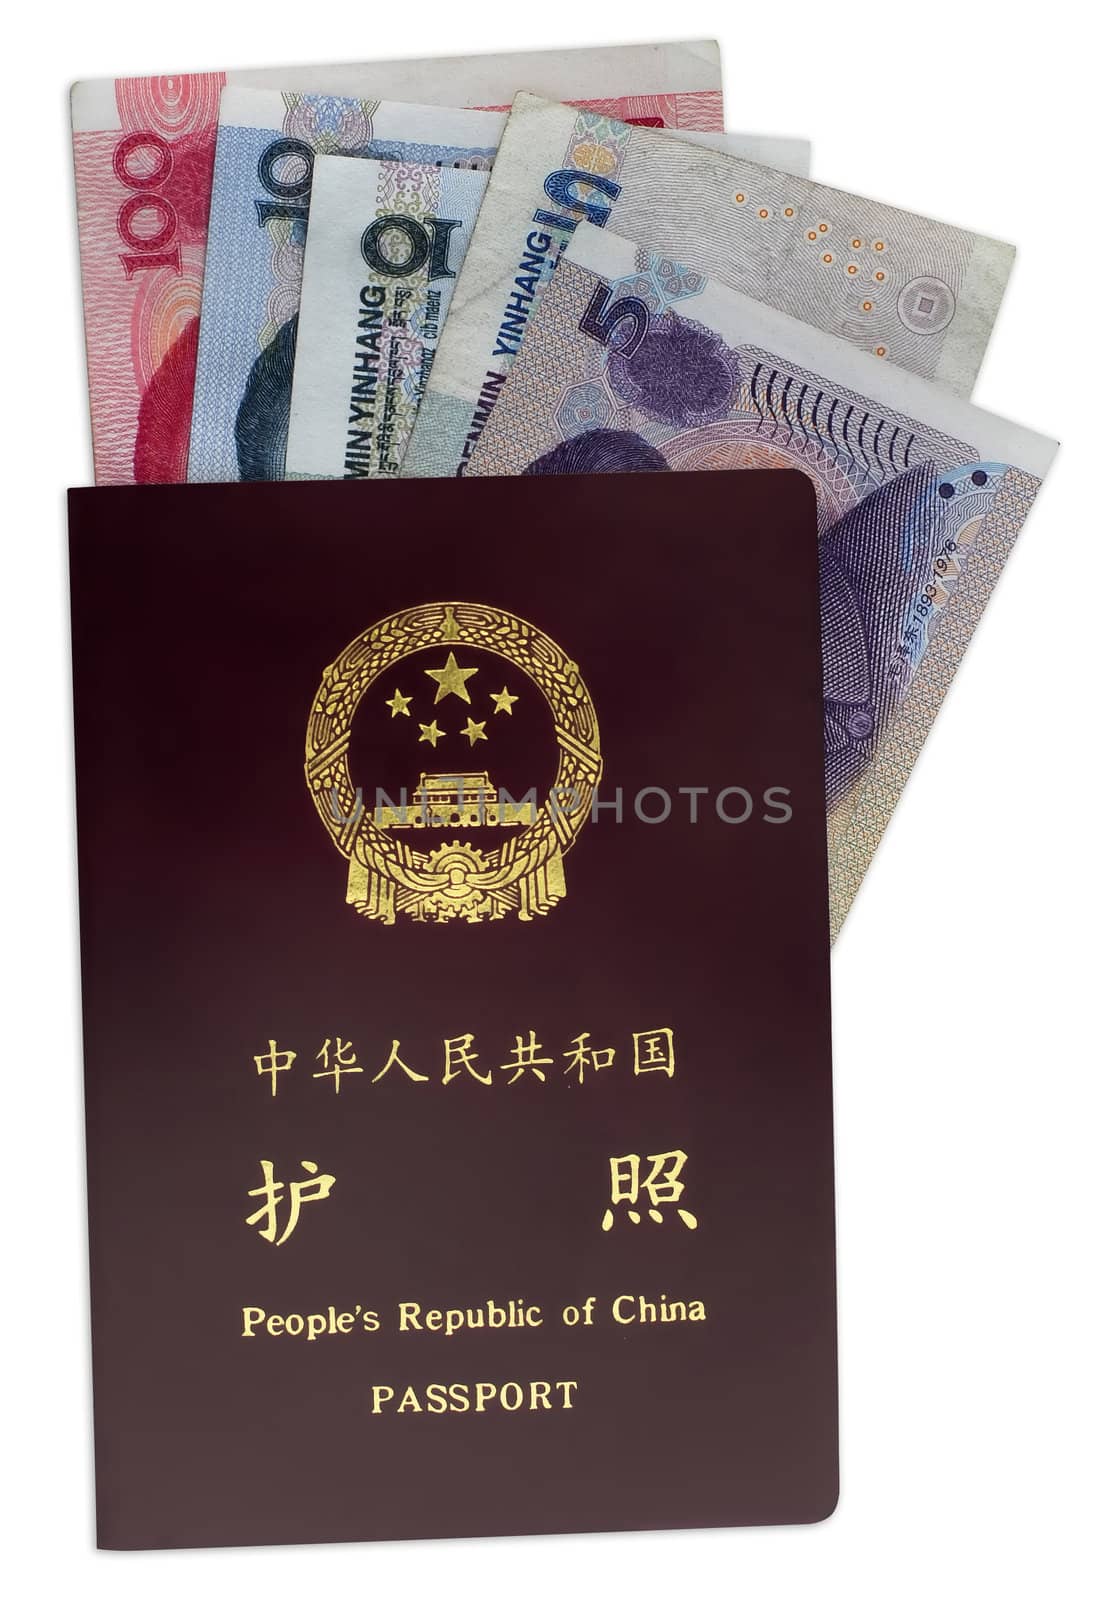 Chinese international passport and chinese mainland currency inside.